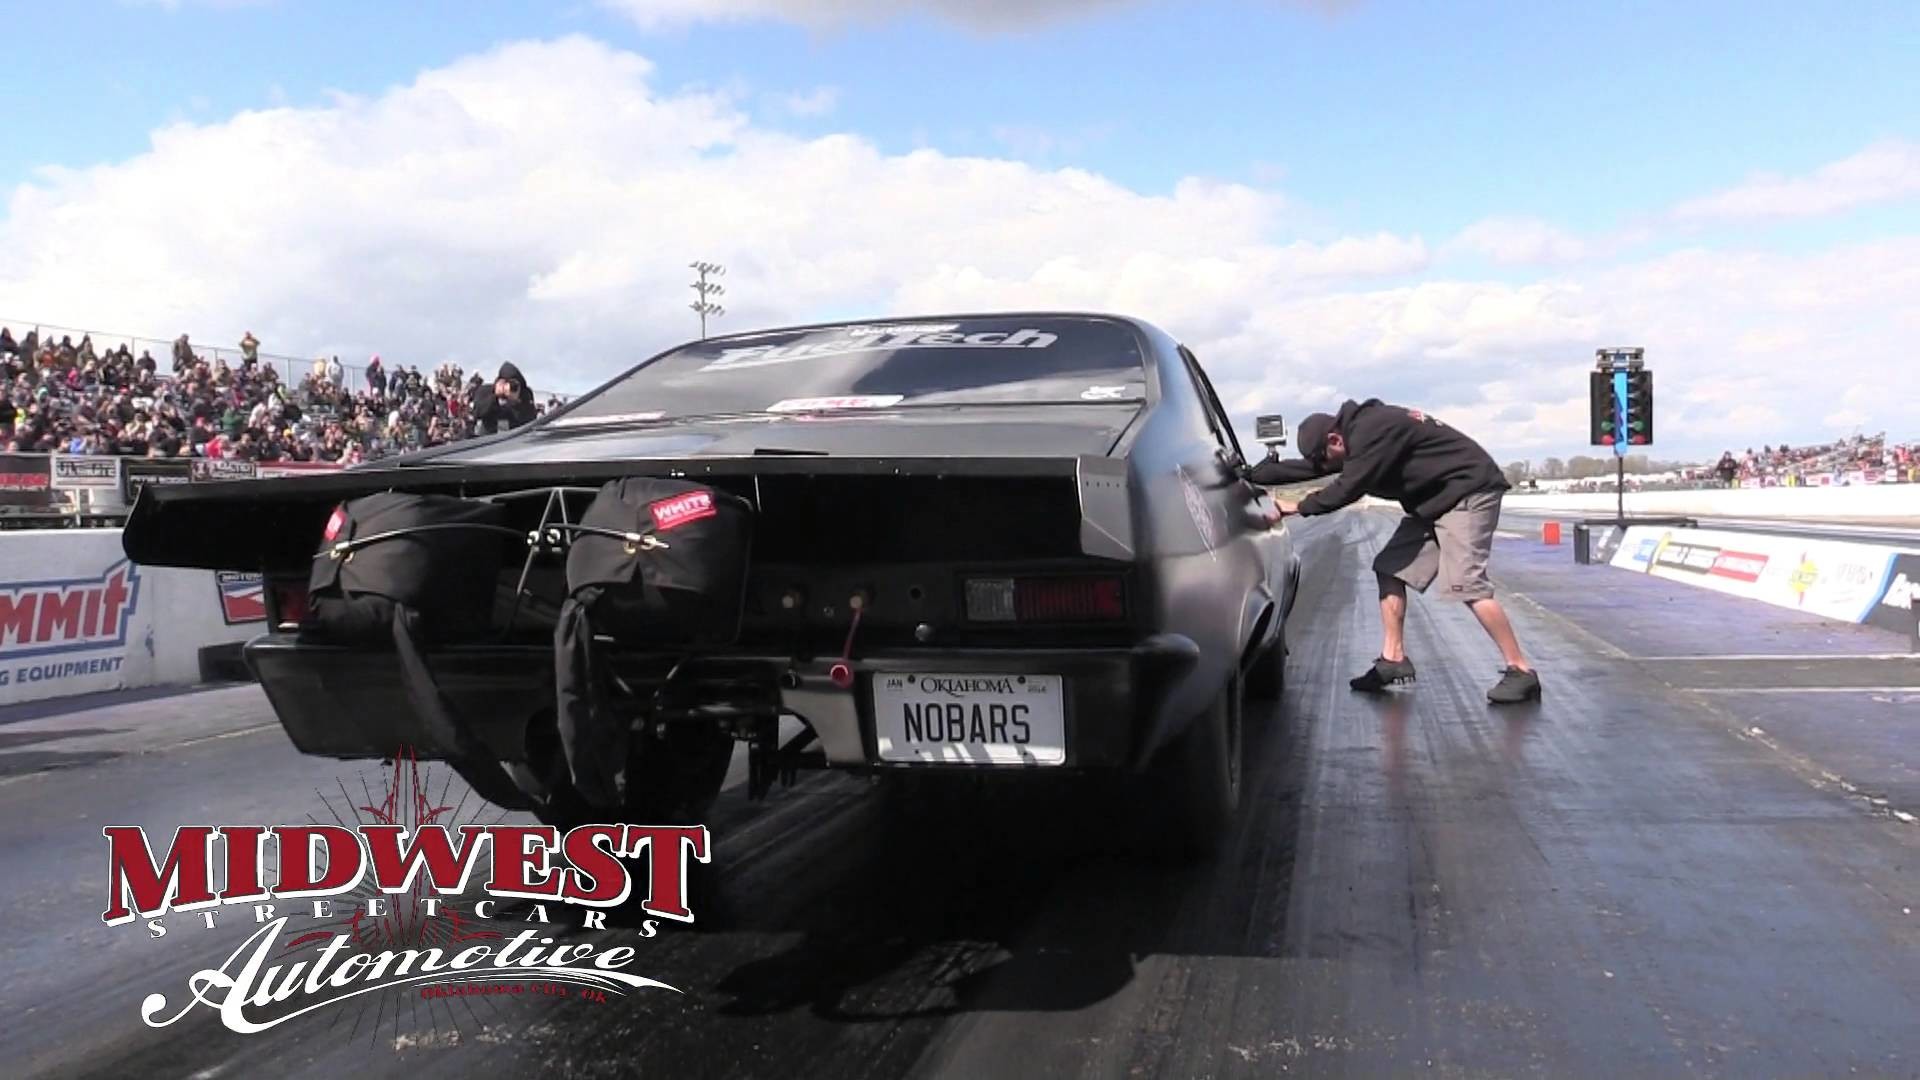 1920x1080 Murder Nova goes 4.28 at 178mph at Outlaw Streetcar Reunion 3!!! - YouTube